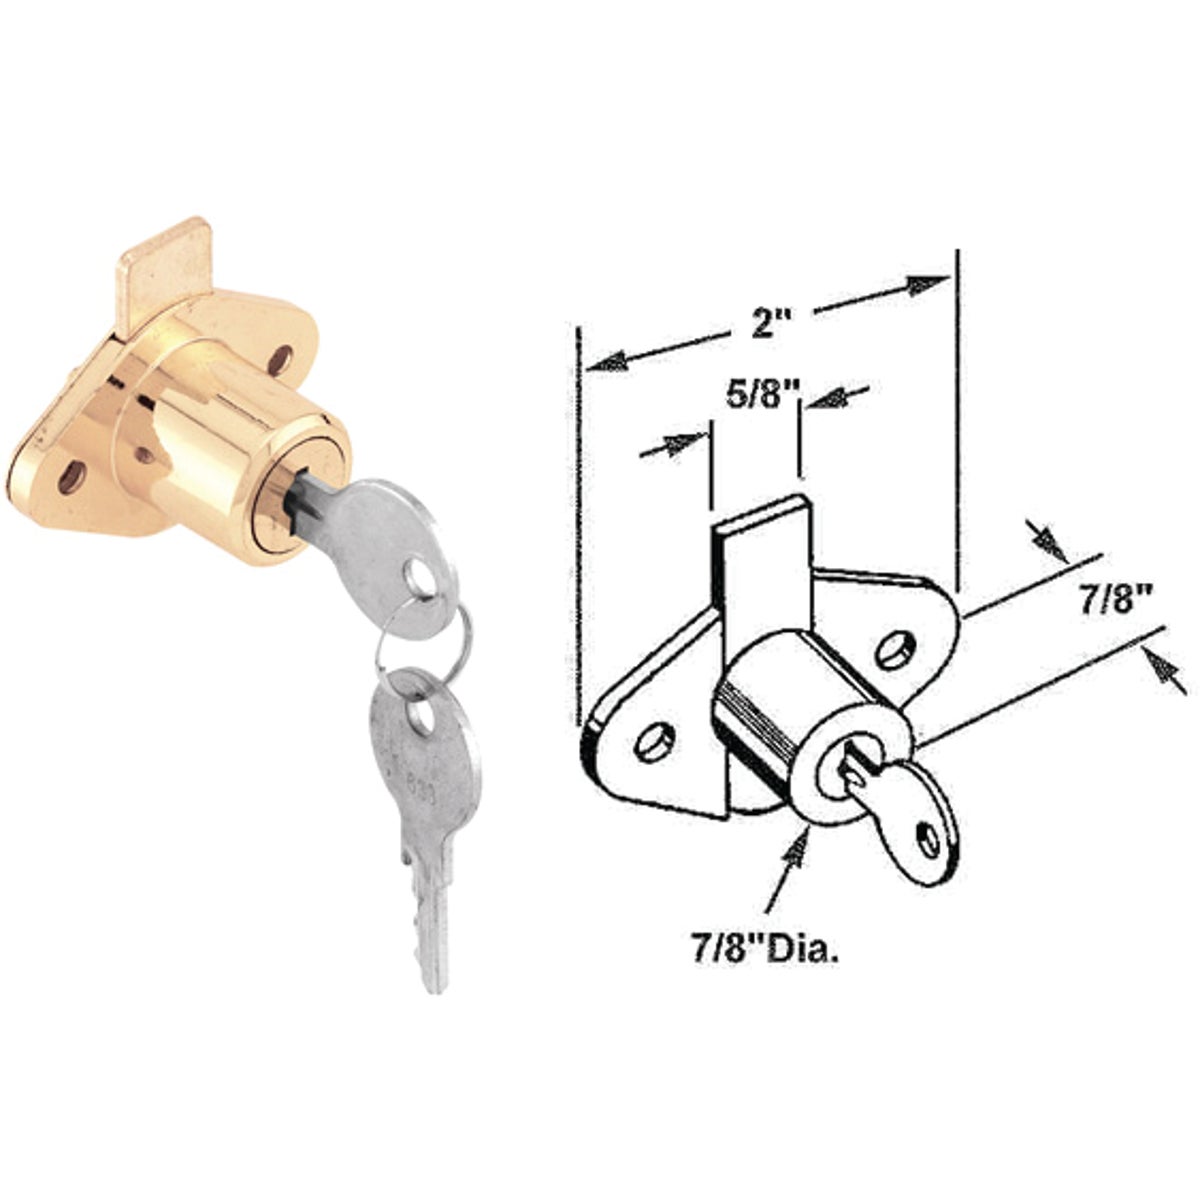 Item 233642, Flush mounting drawer and cabinet lock. For material thickness of 7/8".